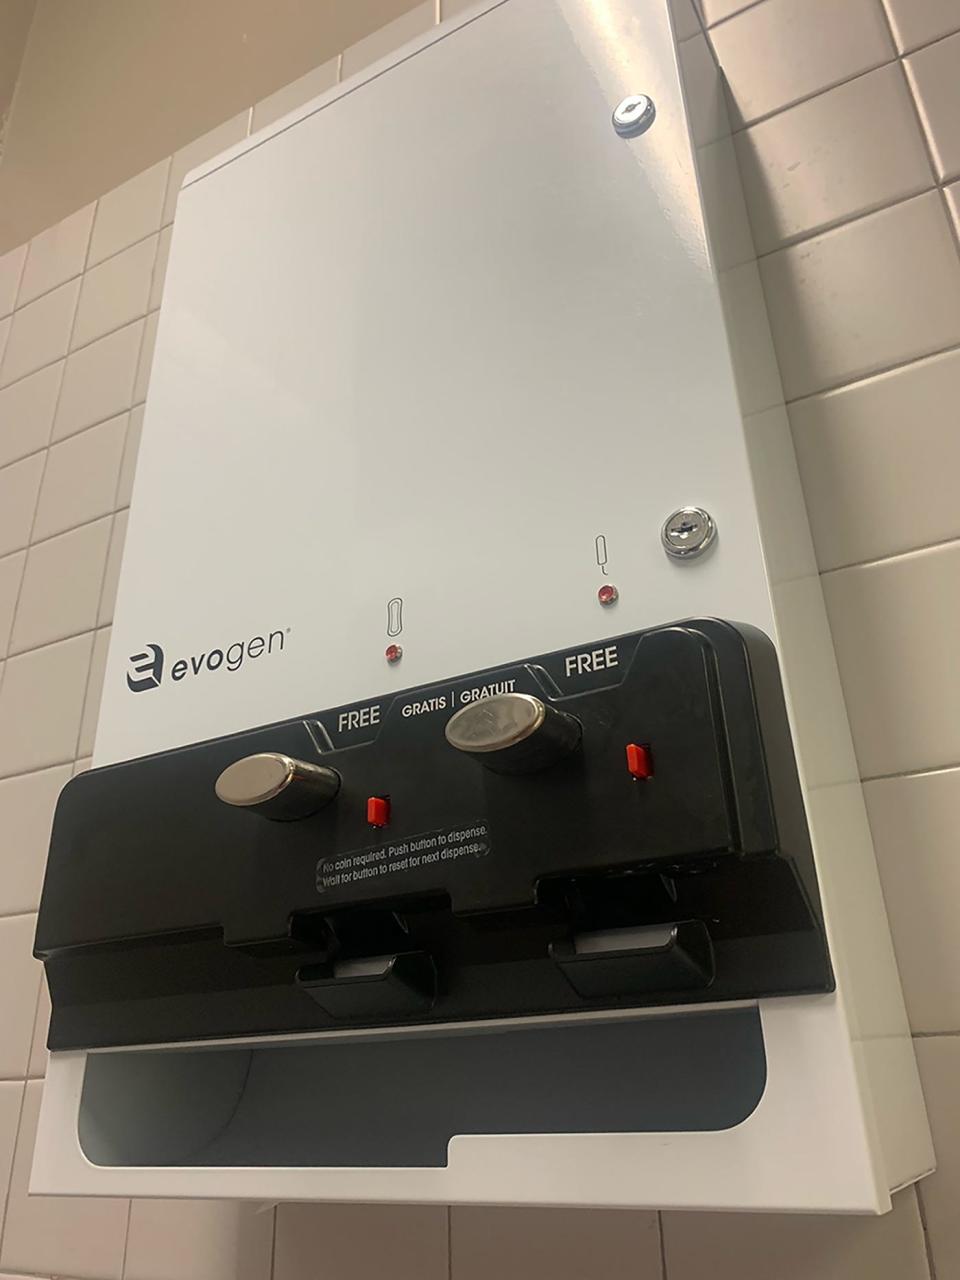 Dispensers of free tampons and pads have been installed in all 30 Title I middle and high schools in Duval County, in partnership with Renewing Dignity, a Jacksonville-based nonprofit.